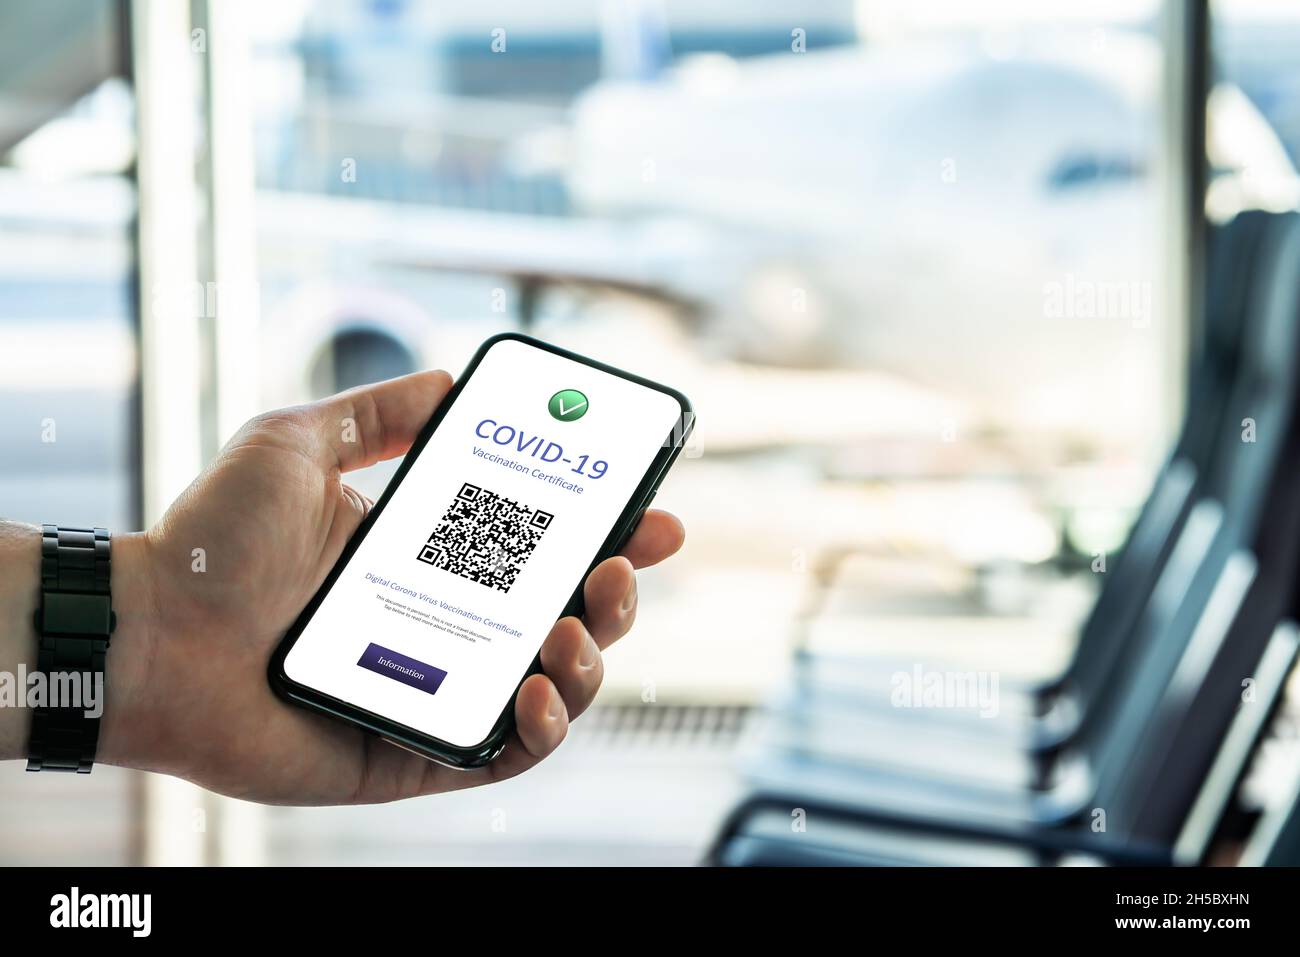 Corona certificate pass about covid vaccine at airport. Digital covid19 passport document in phone. Plane in window before international flight. Stock Photo